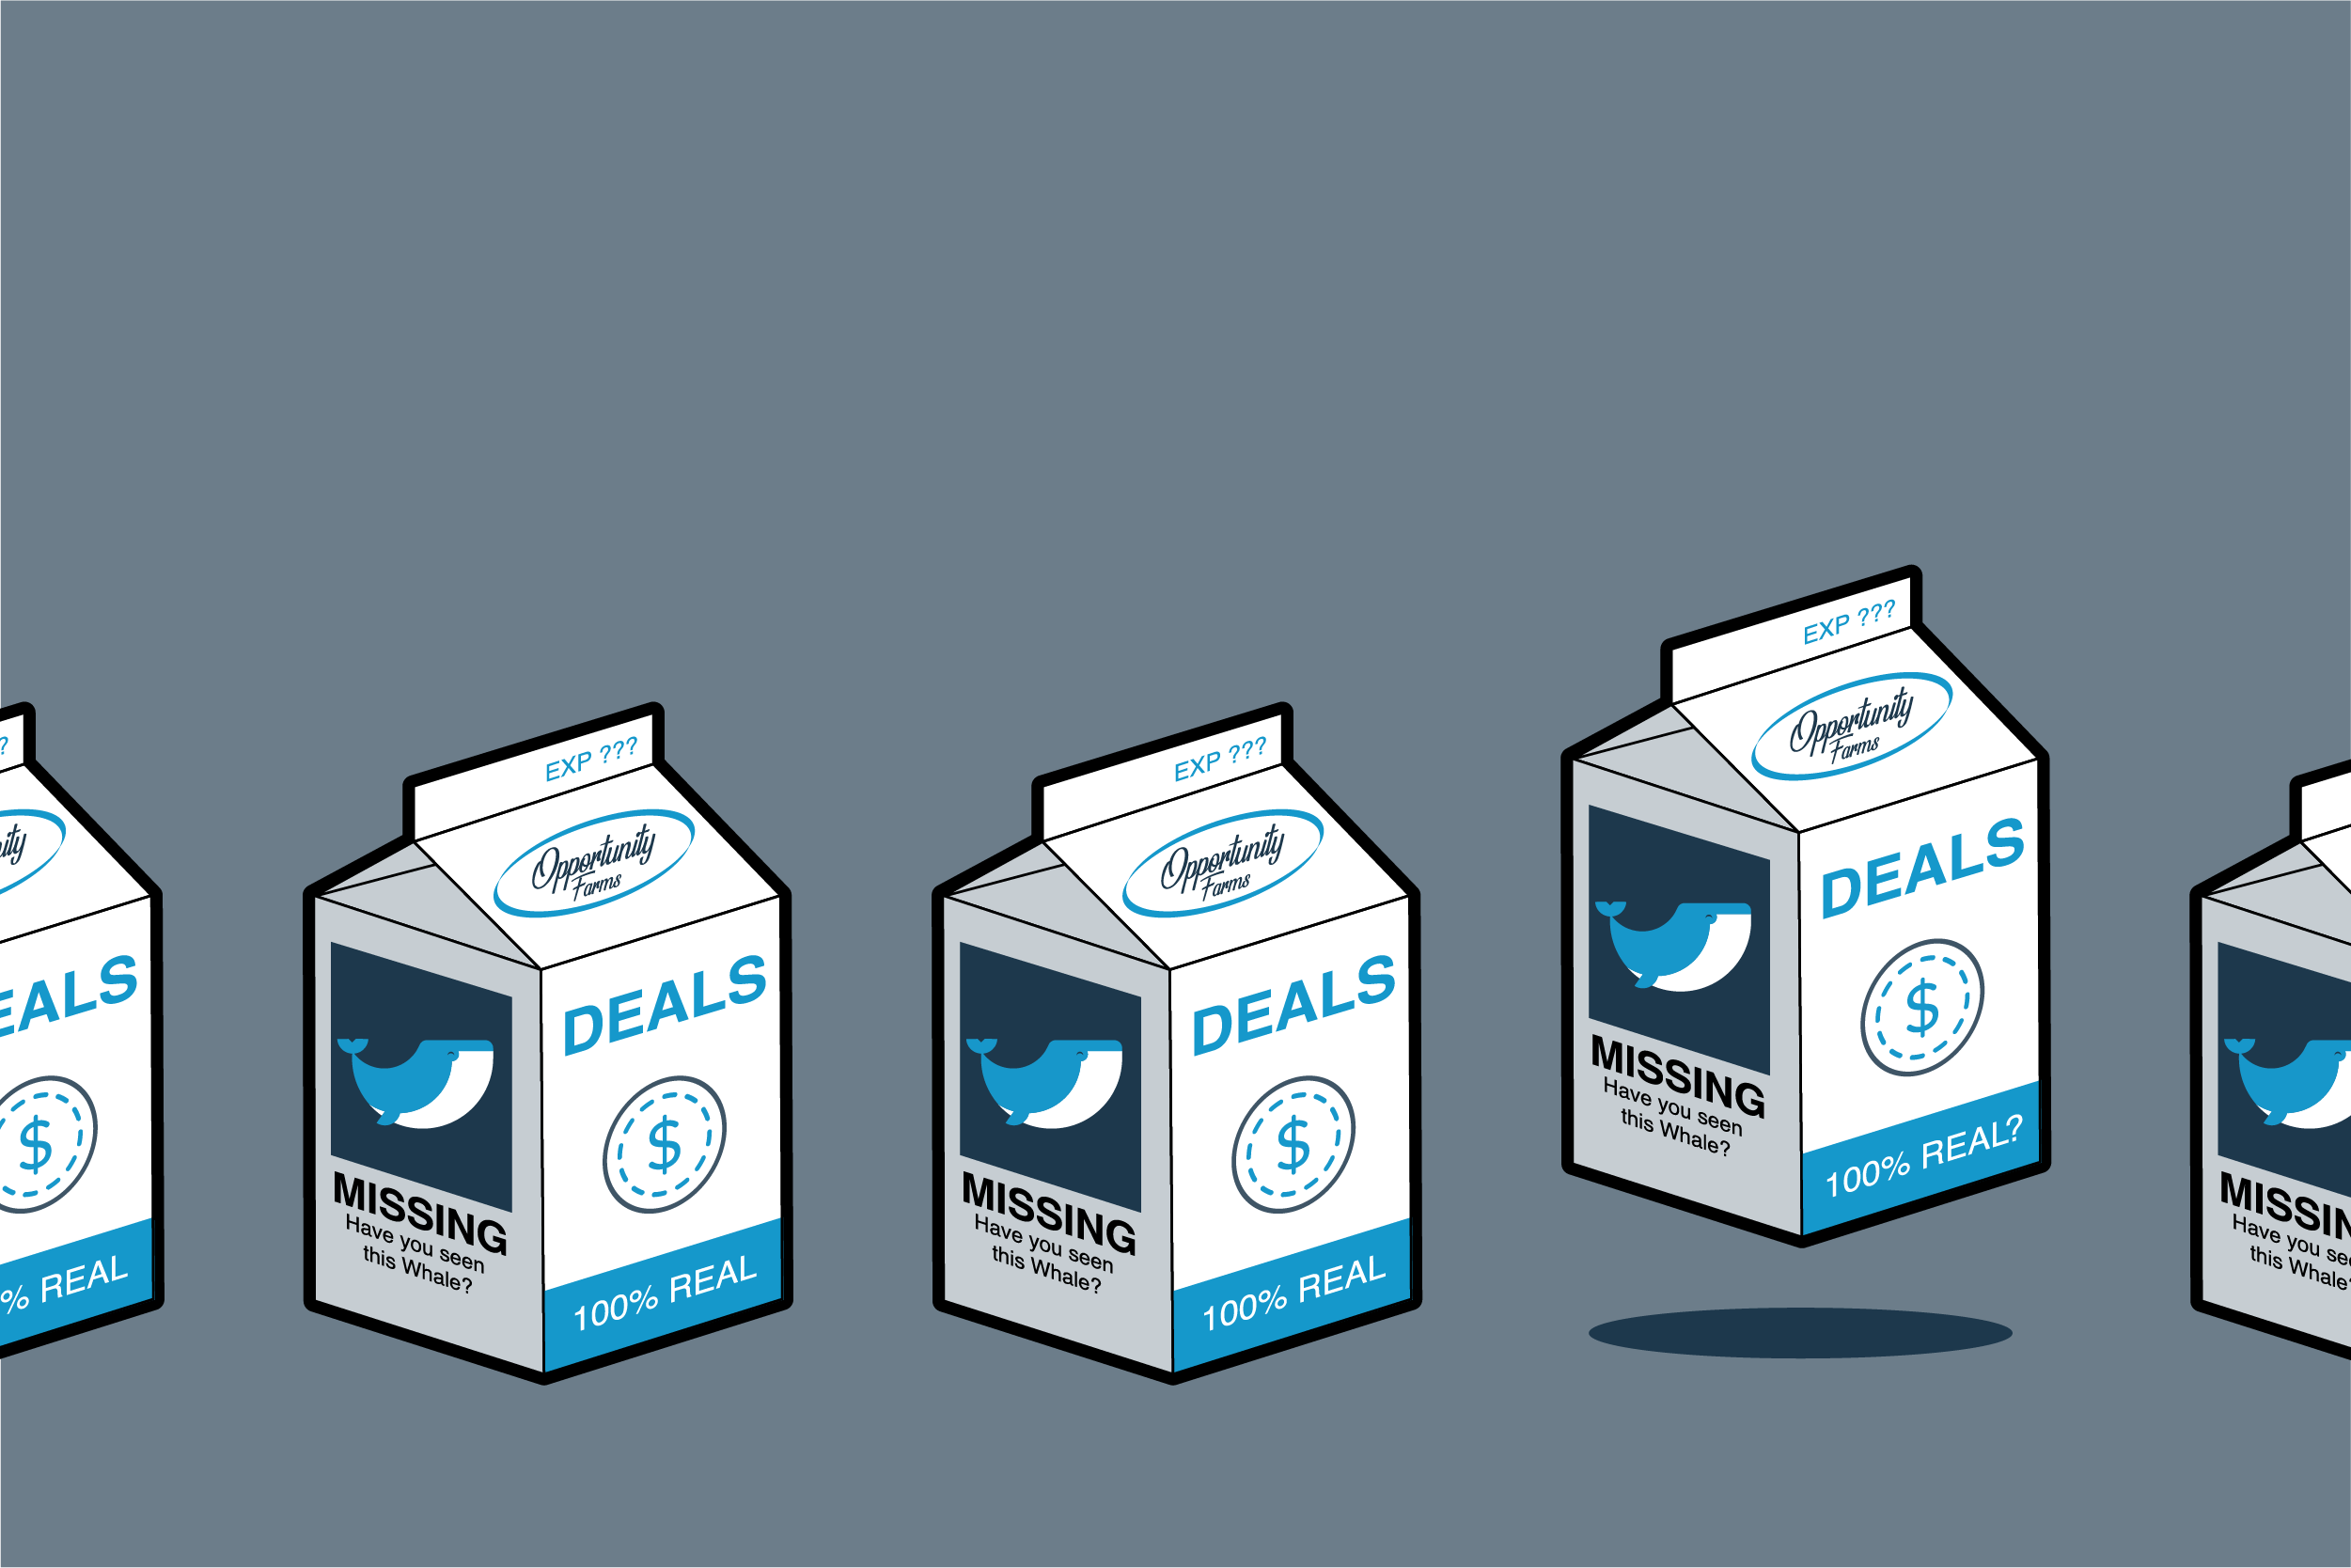 Illustration of sales opportunities as milk cartons featuring a whale and text saying Missing have you seen this Whale